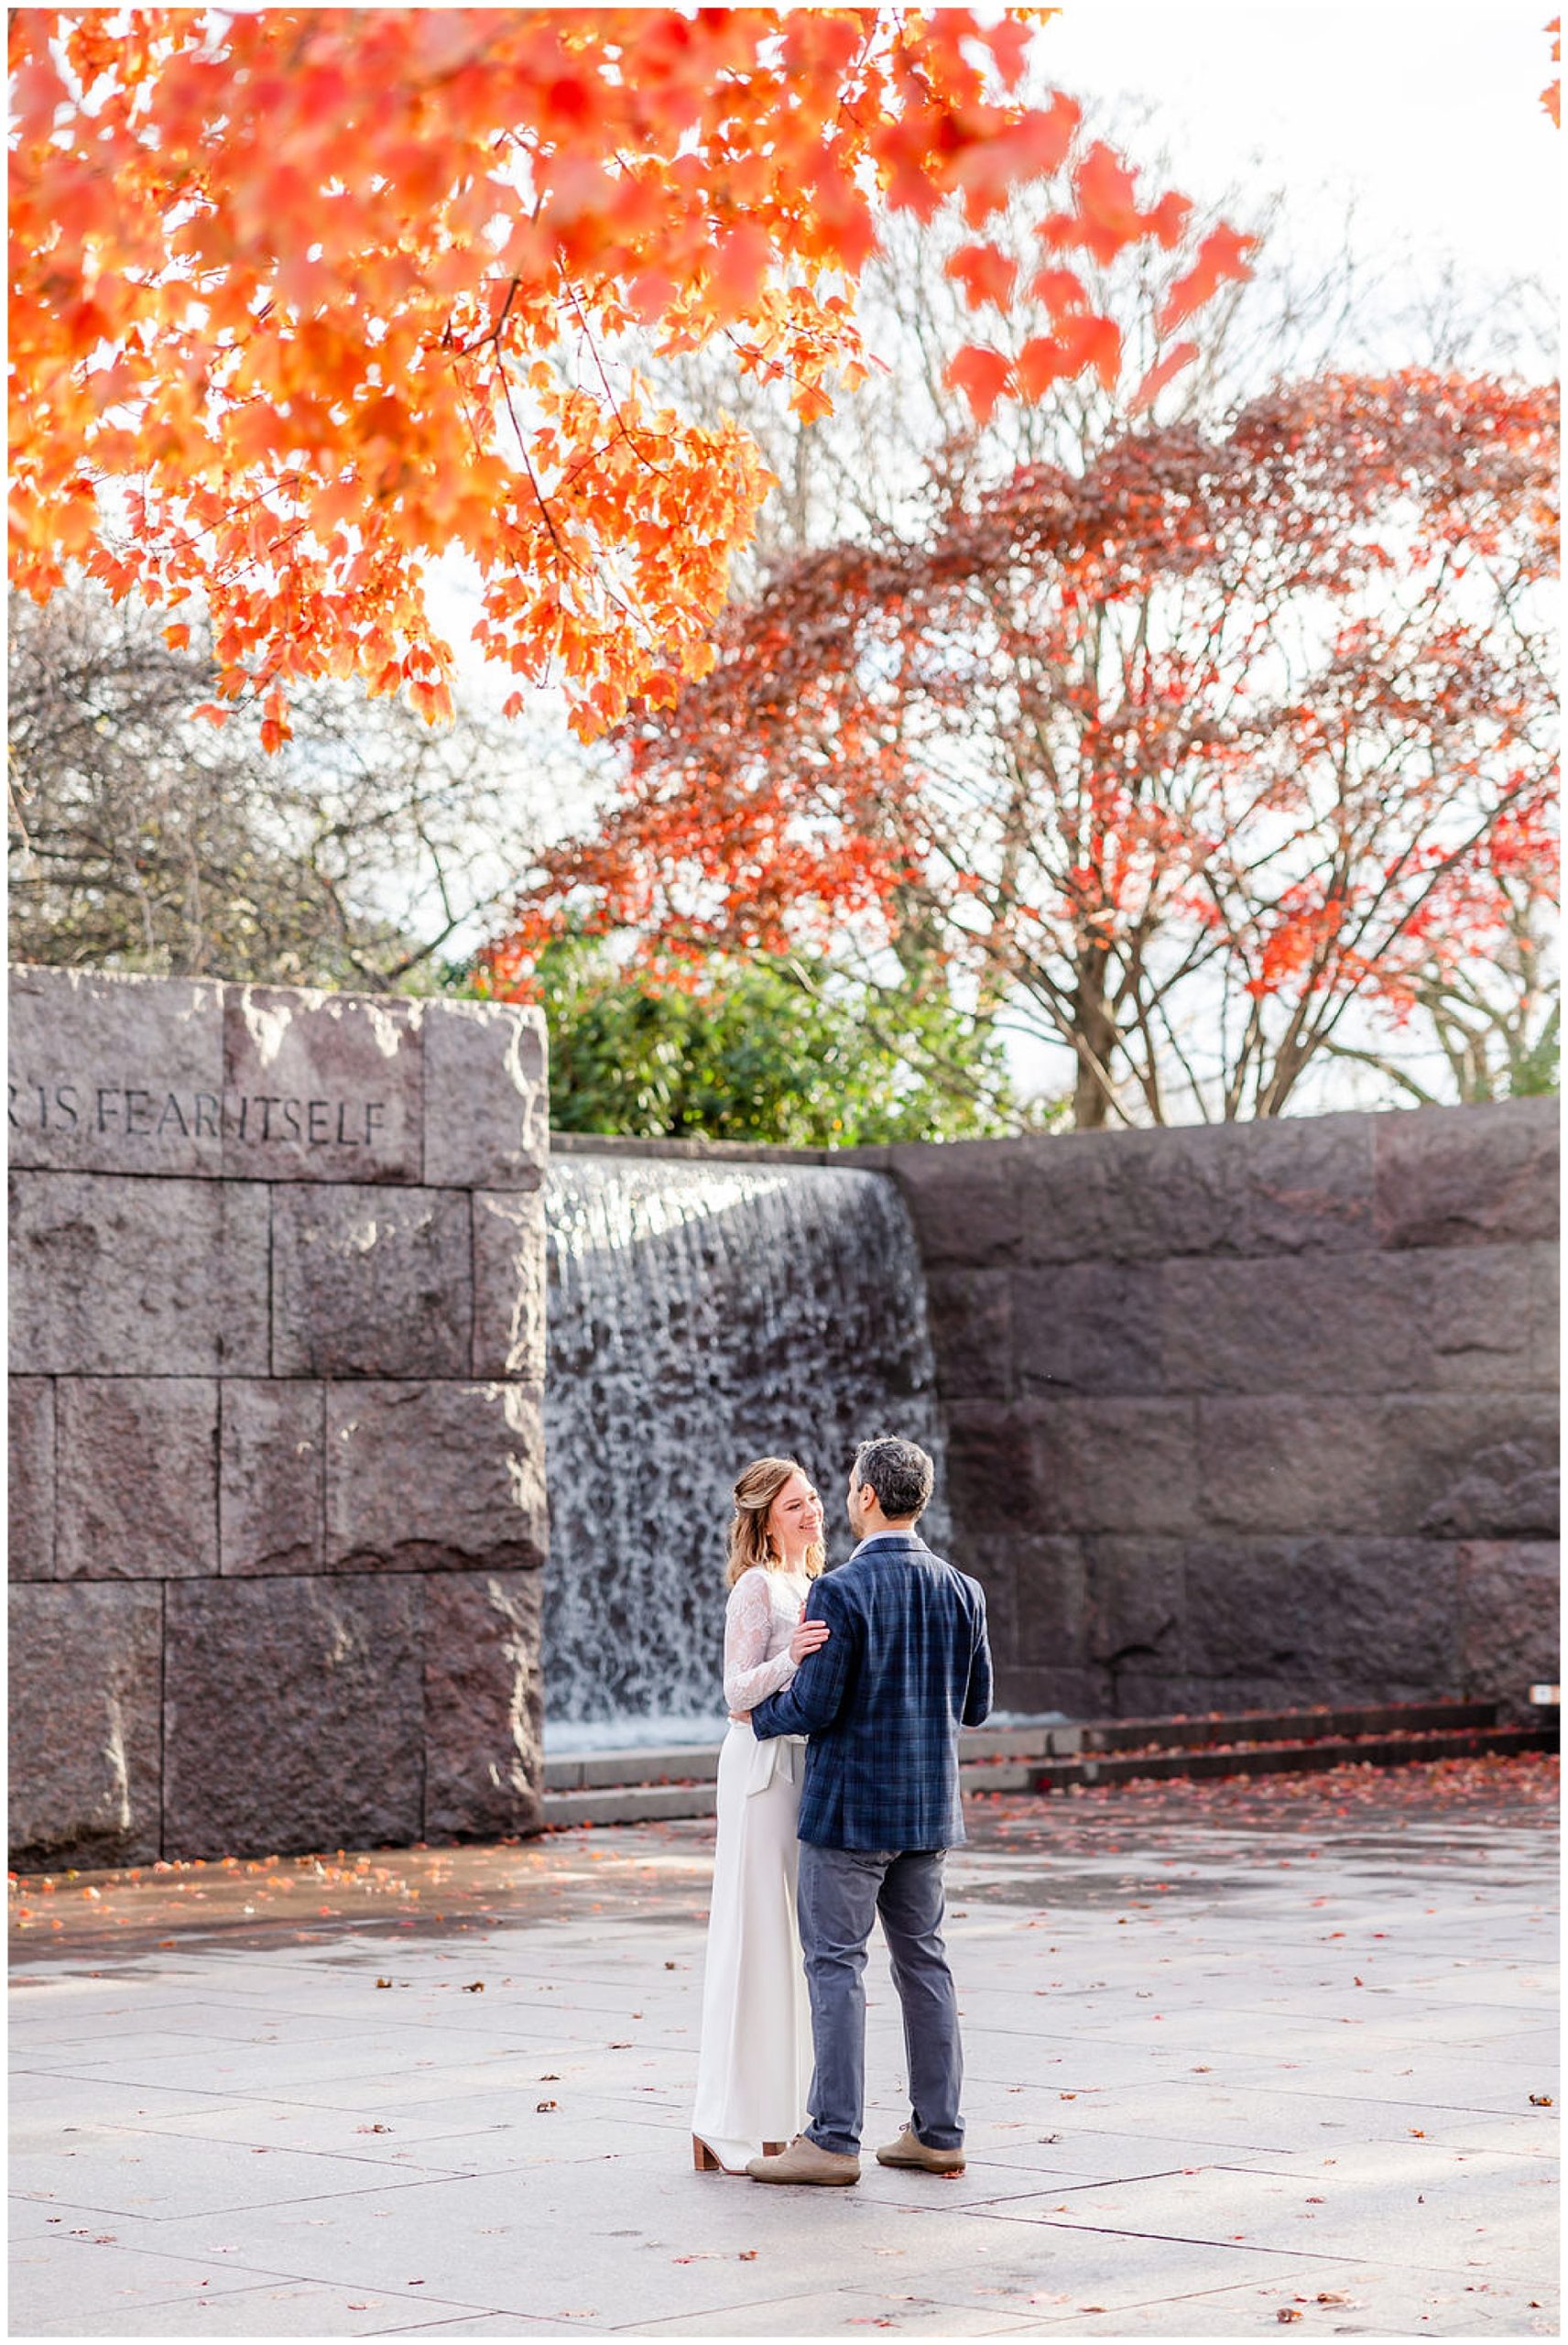 FDR Memorial elopement, DC War Memorial elopement, DC War Memorial photos, DC War Memorial wedding, DC portraits, tidal basin portraits, DC wedding photography, DC elopement photographer, cold weather elopement, Rachel E.H. Photography, couple smiling at each other, couple laughing, couple in front of waterfall, orange and red leaves